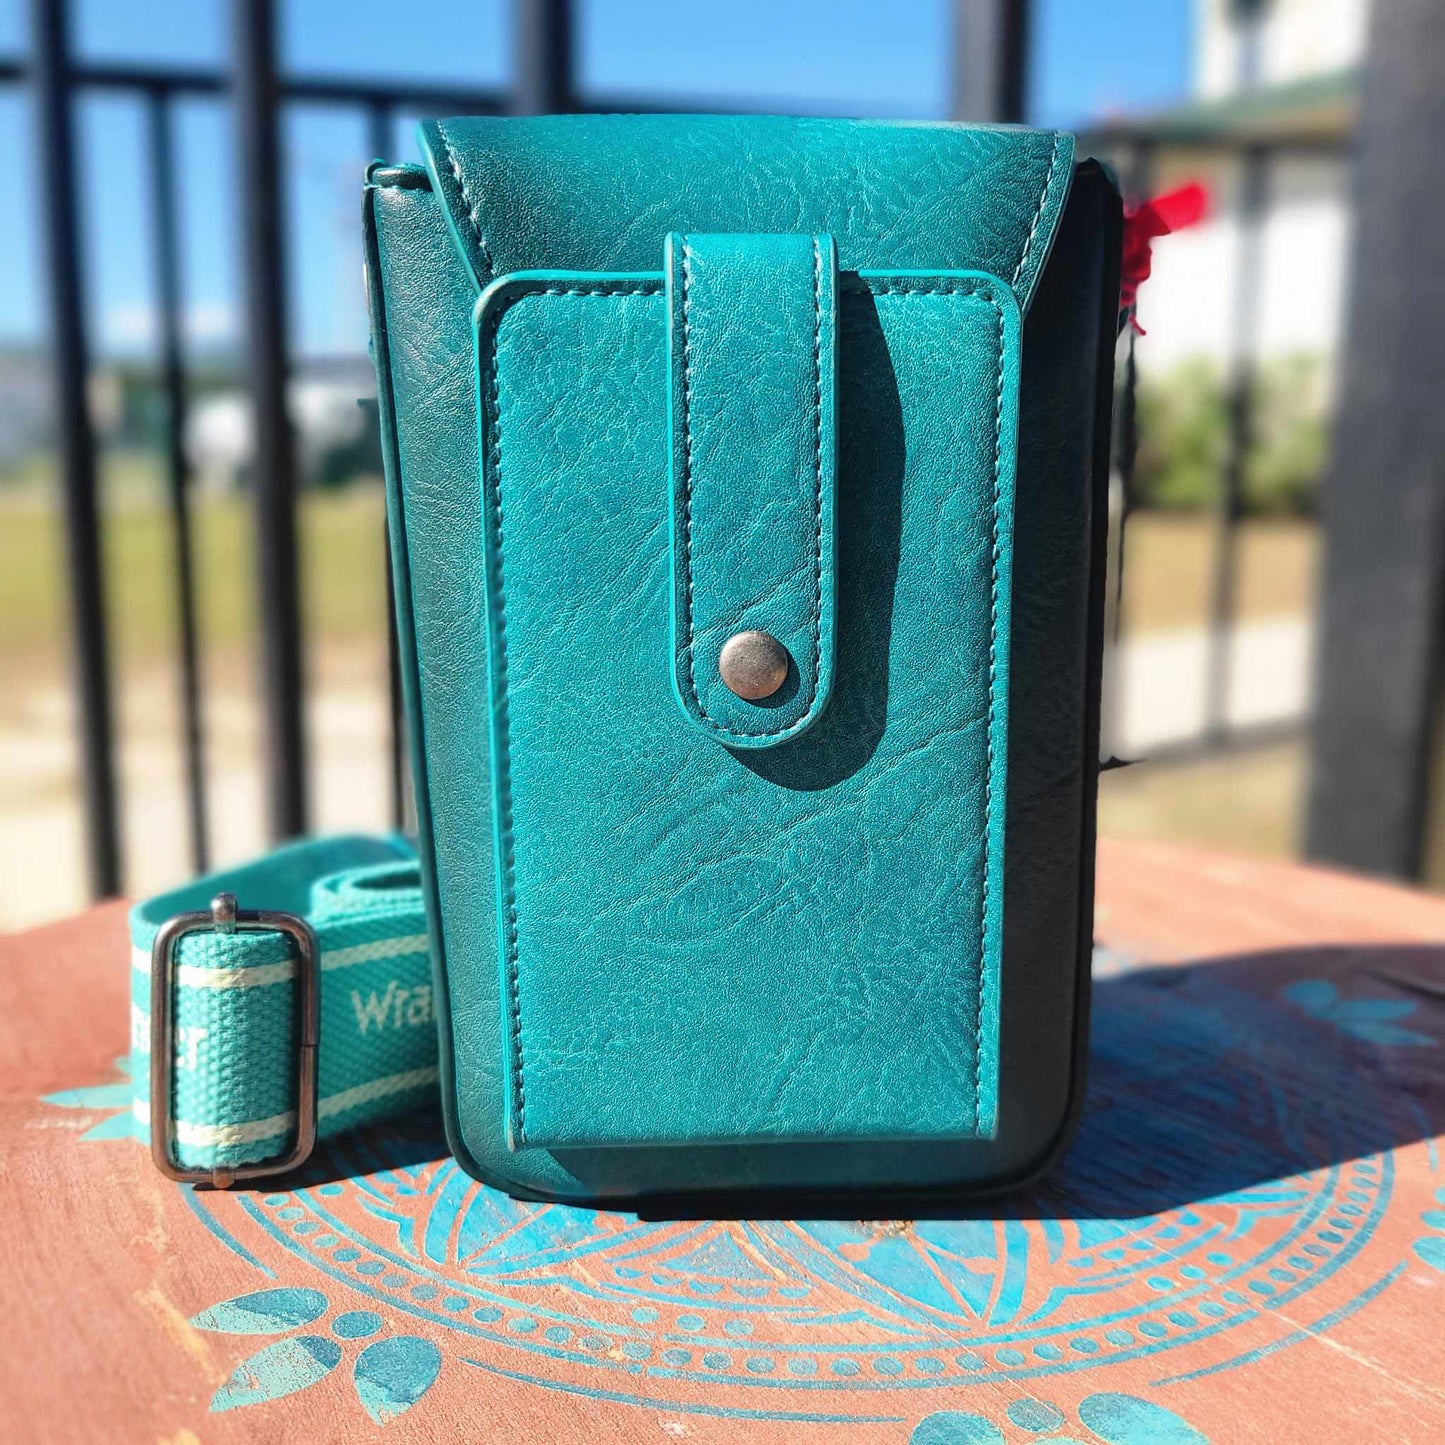 Wrangler Cell Phone Purse With Card Slots - Turquoise